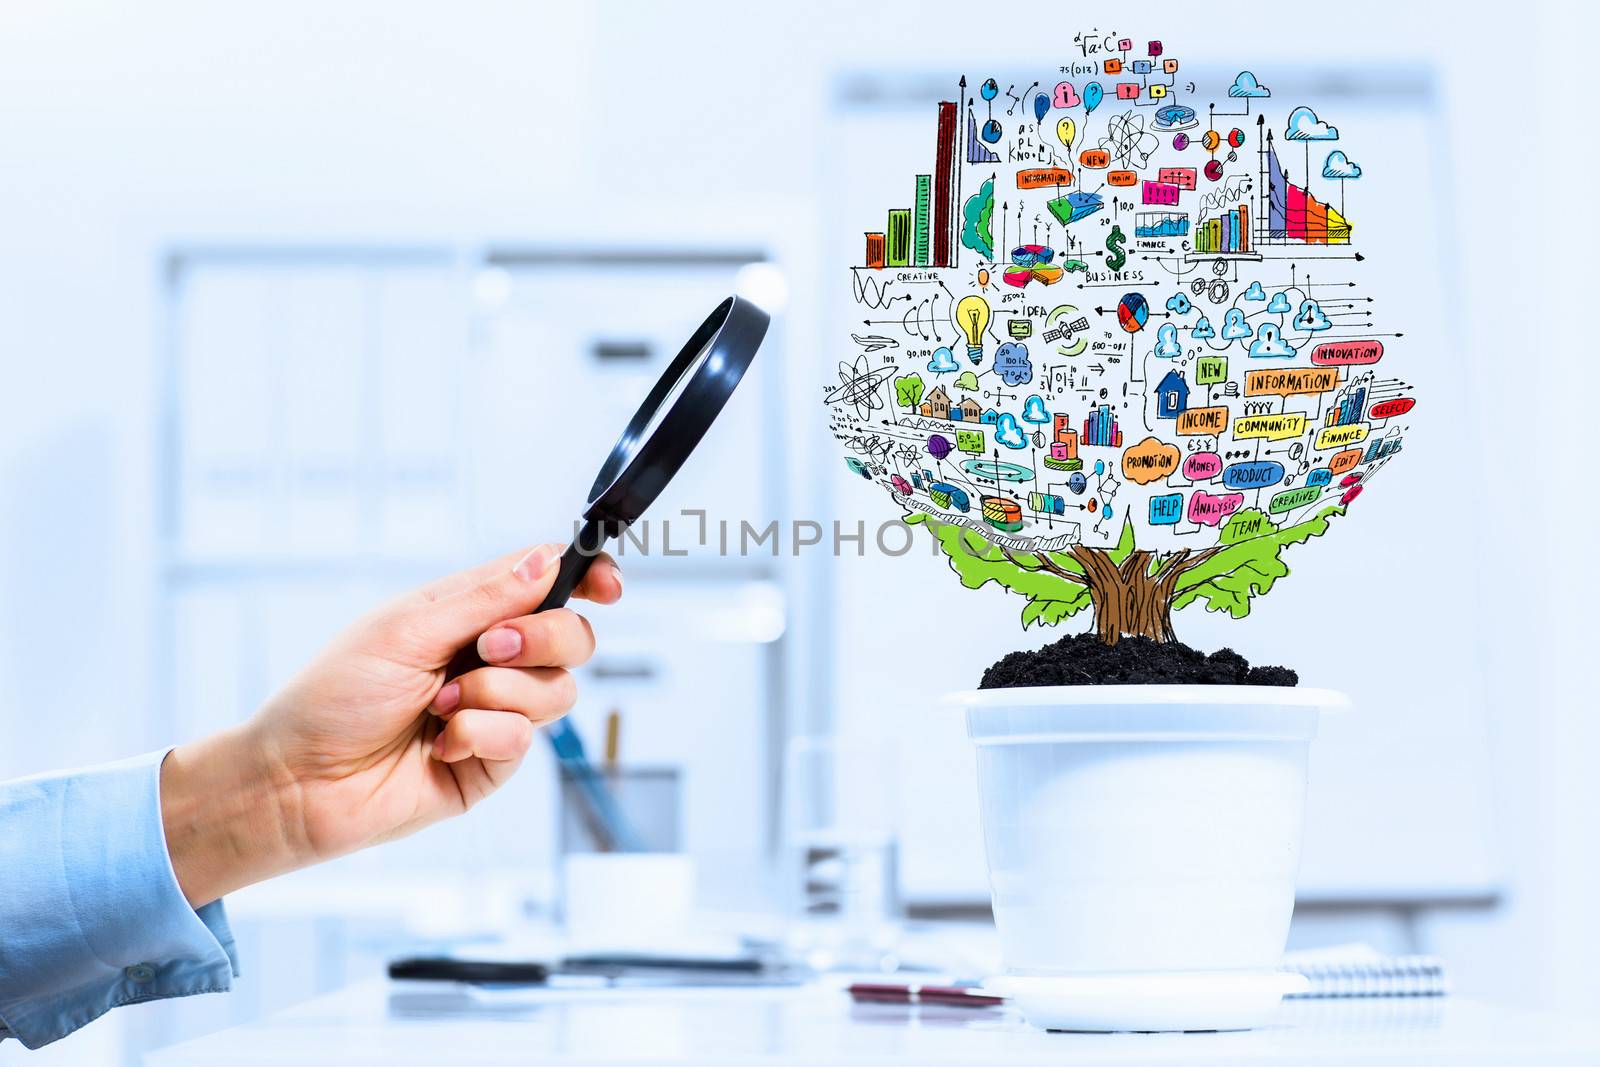 Close-up image of human hand and pot with money tree